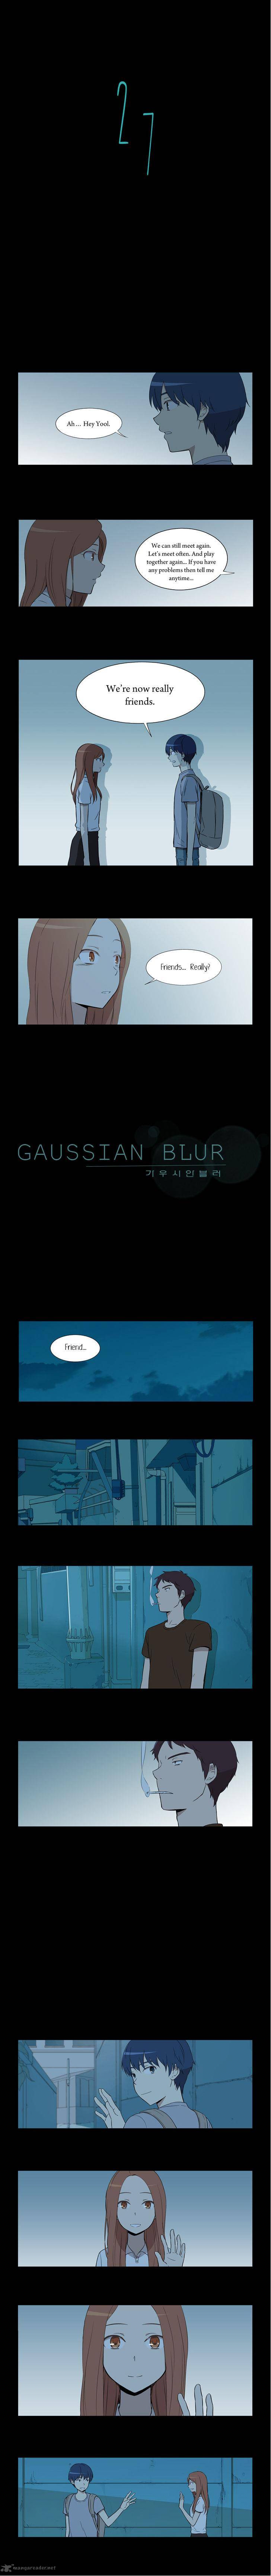 Gaussian Blur Chapter 27 Page 1